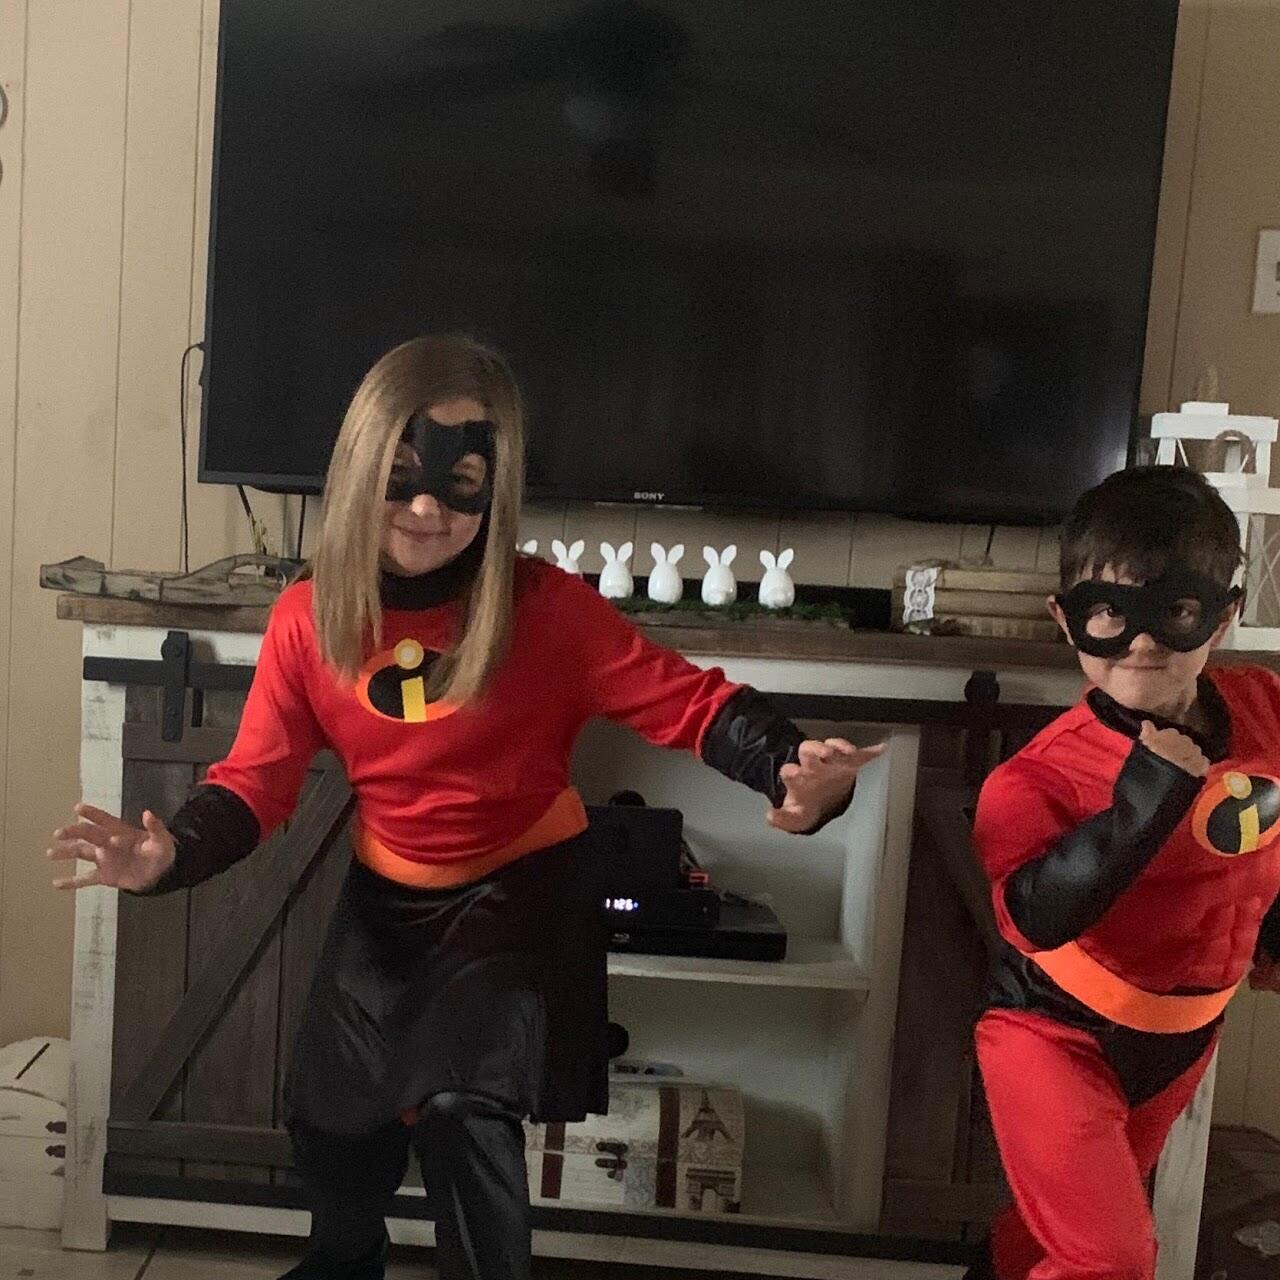 Two children dressed as superheroes